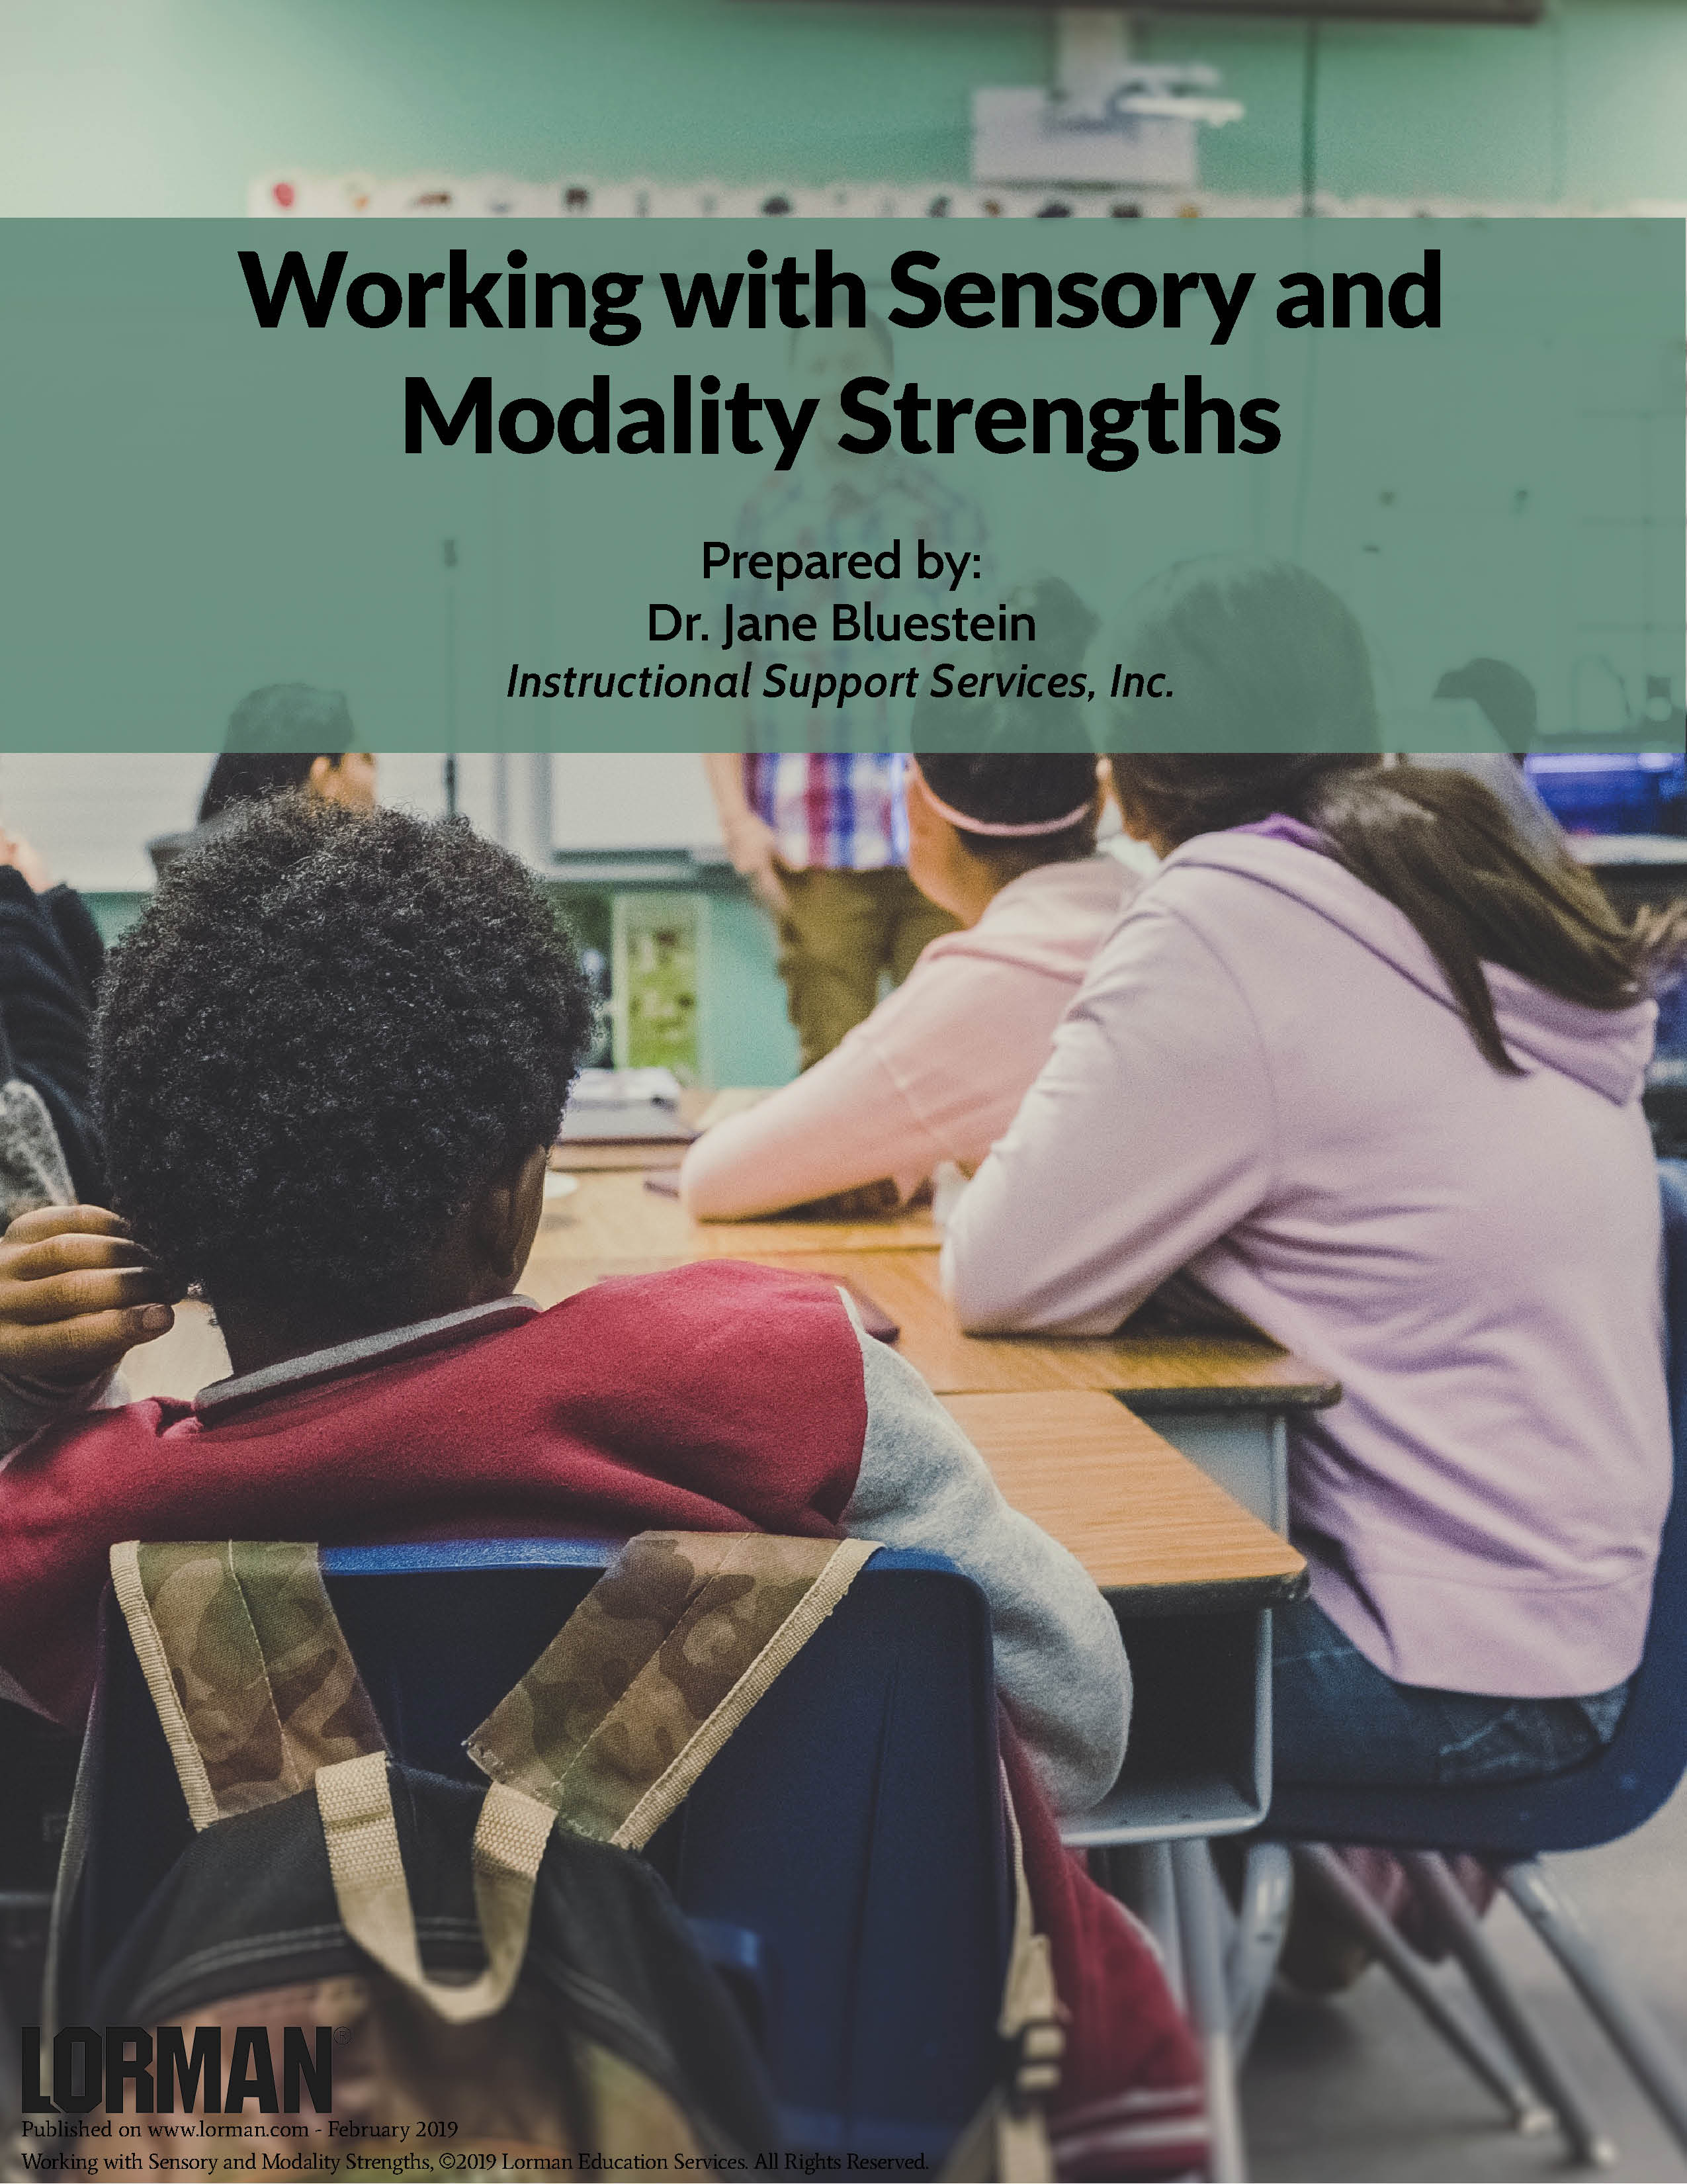 Working with Sensory and Modality Strengths